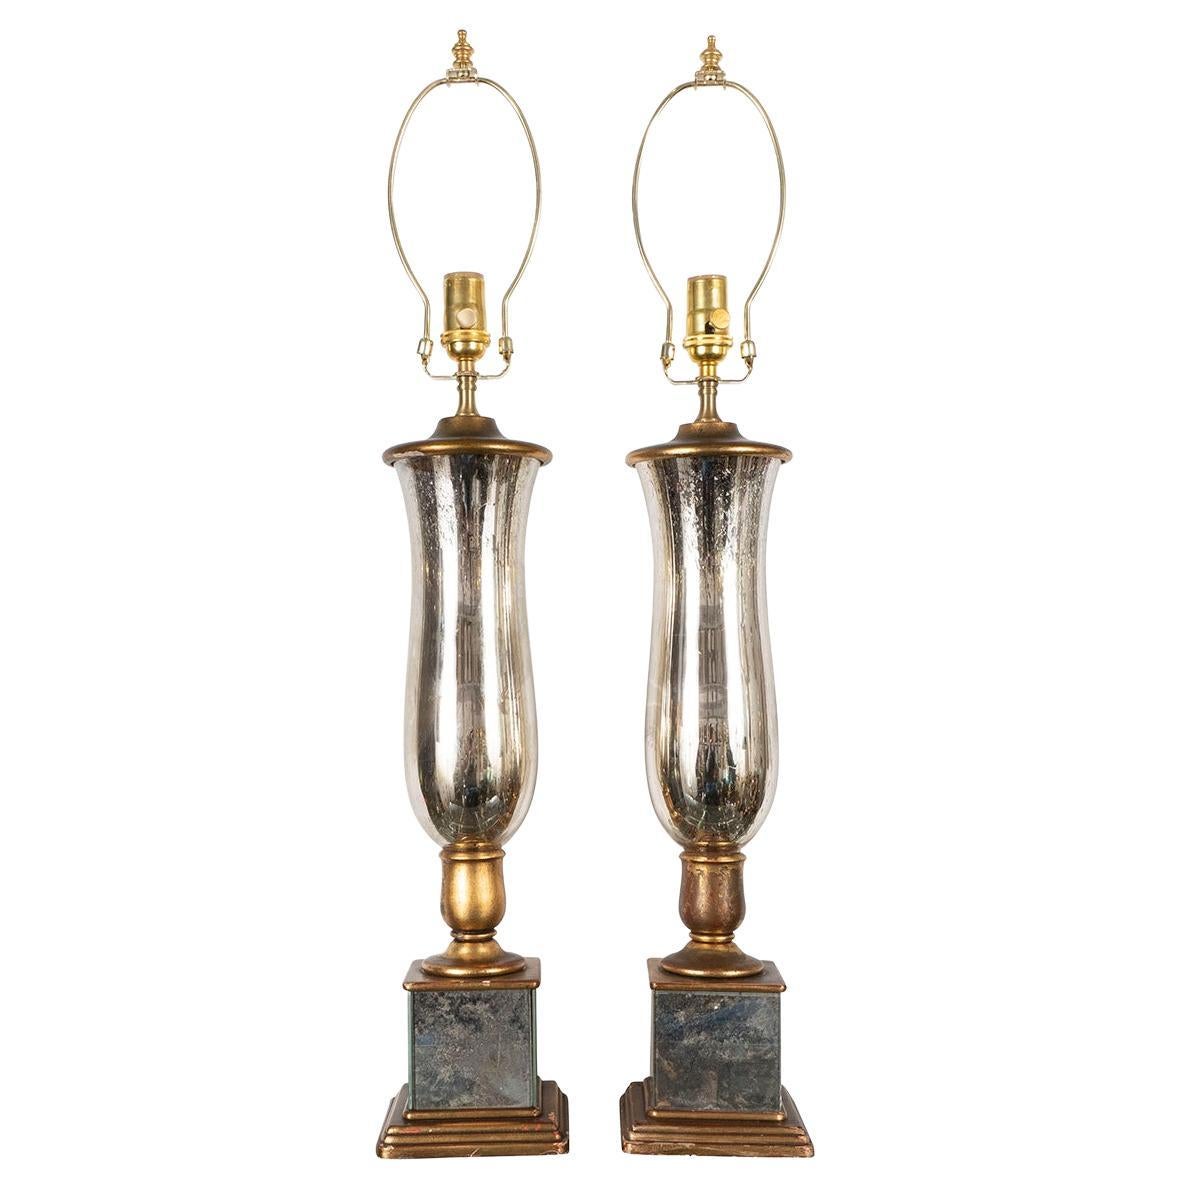 Pair of Urn-Shaped Mercury Glass Lamps For Sale